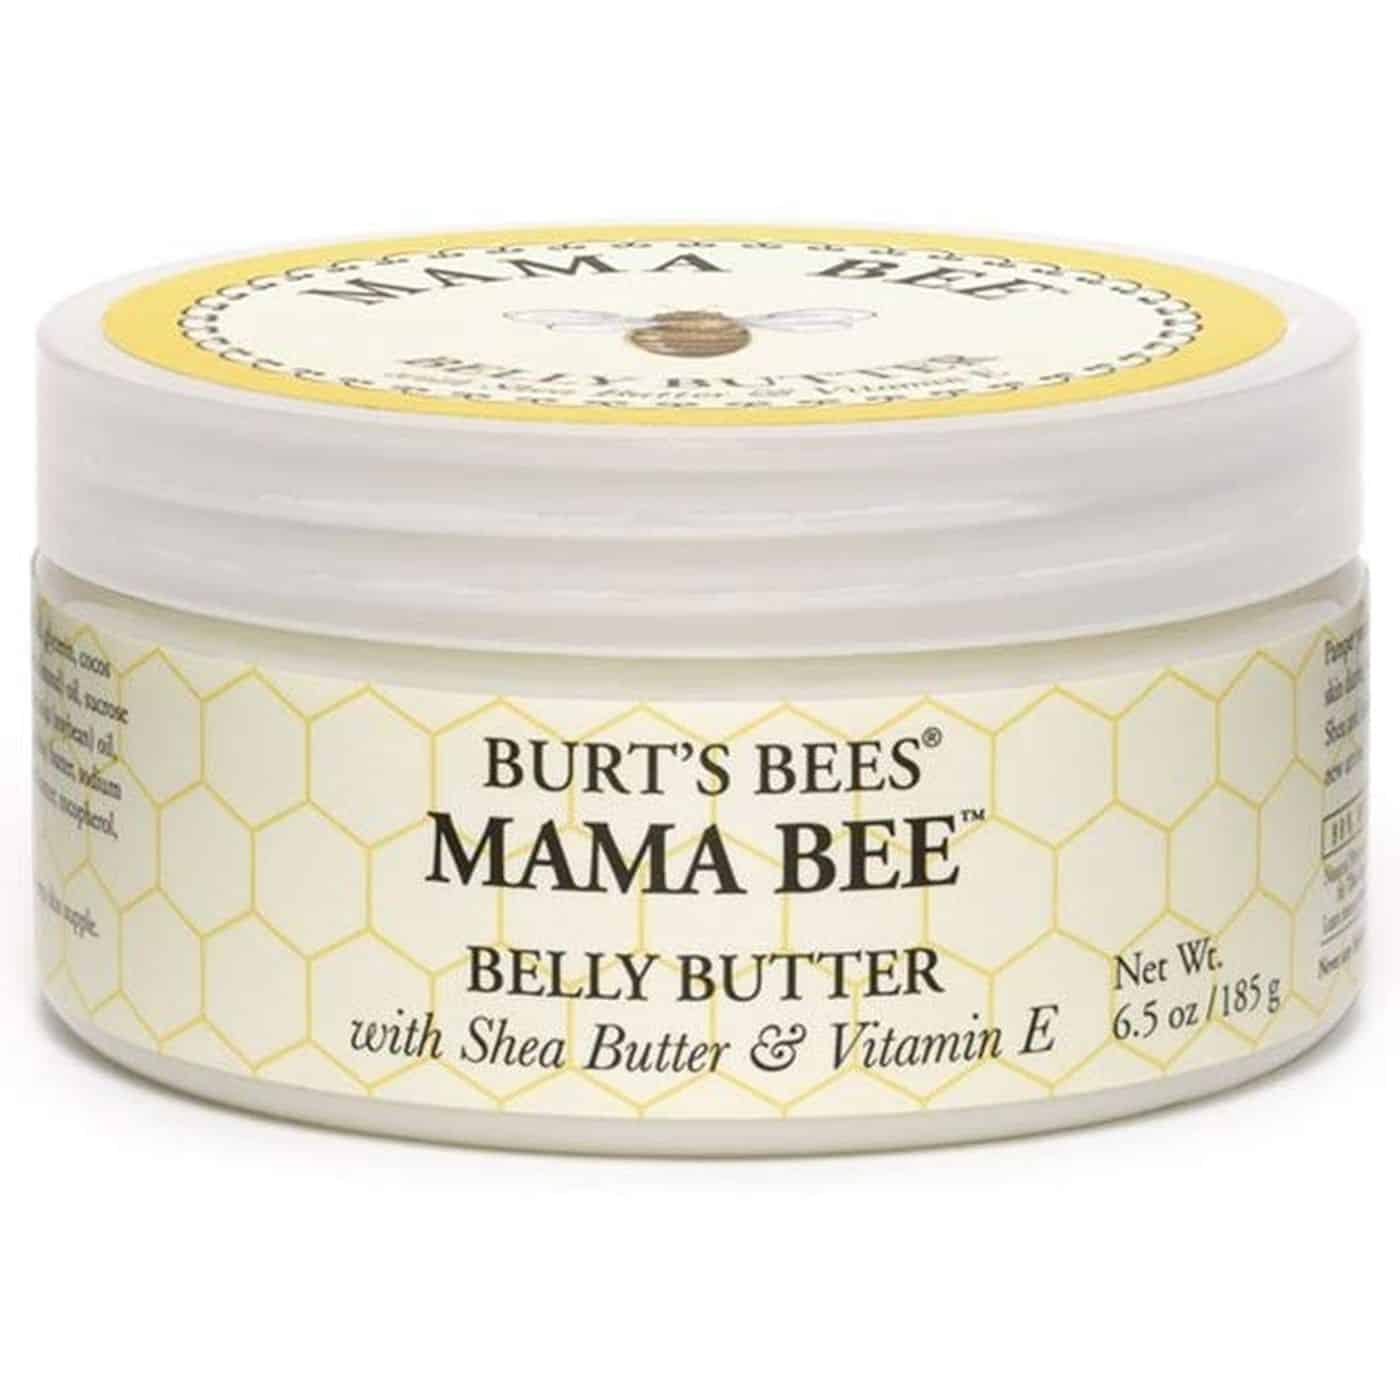 burts bees mama bee belly butter